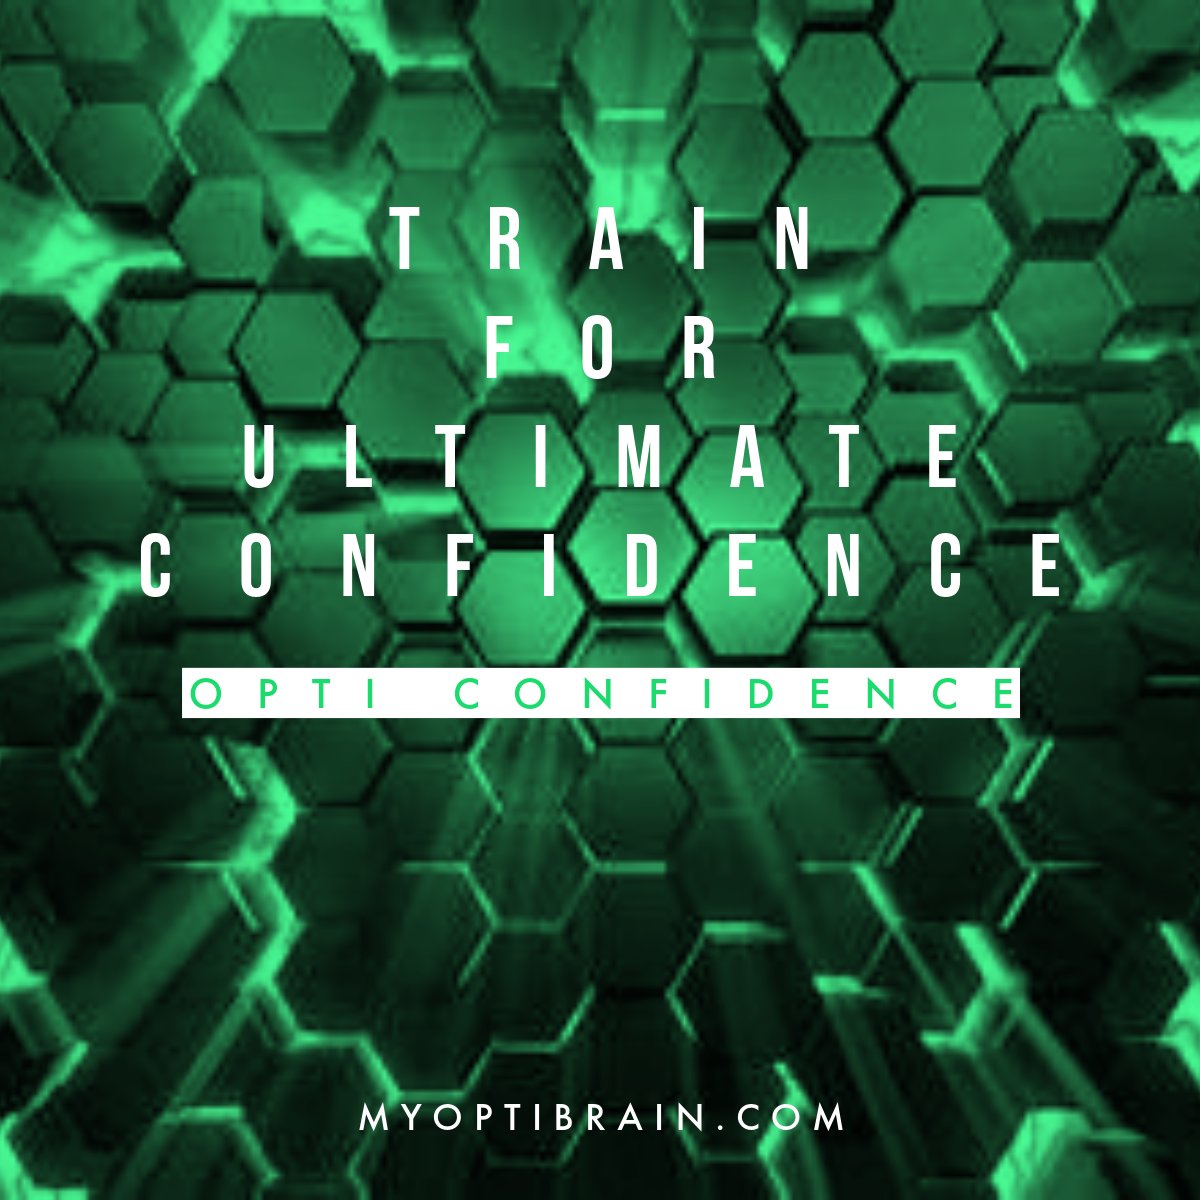 Take charge and step into your next pressure situation with ultimate #confidence. Train with Opti Confidence and feel the fearlessness to dominate.

#optibrain #takecharge #unstoppable #peakperformance #braintraining #mentaltraining